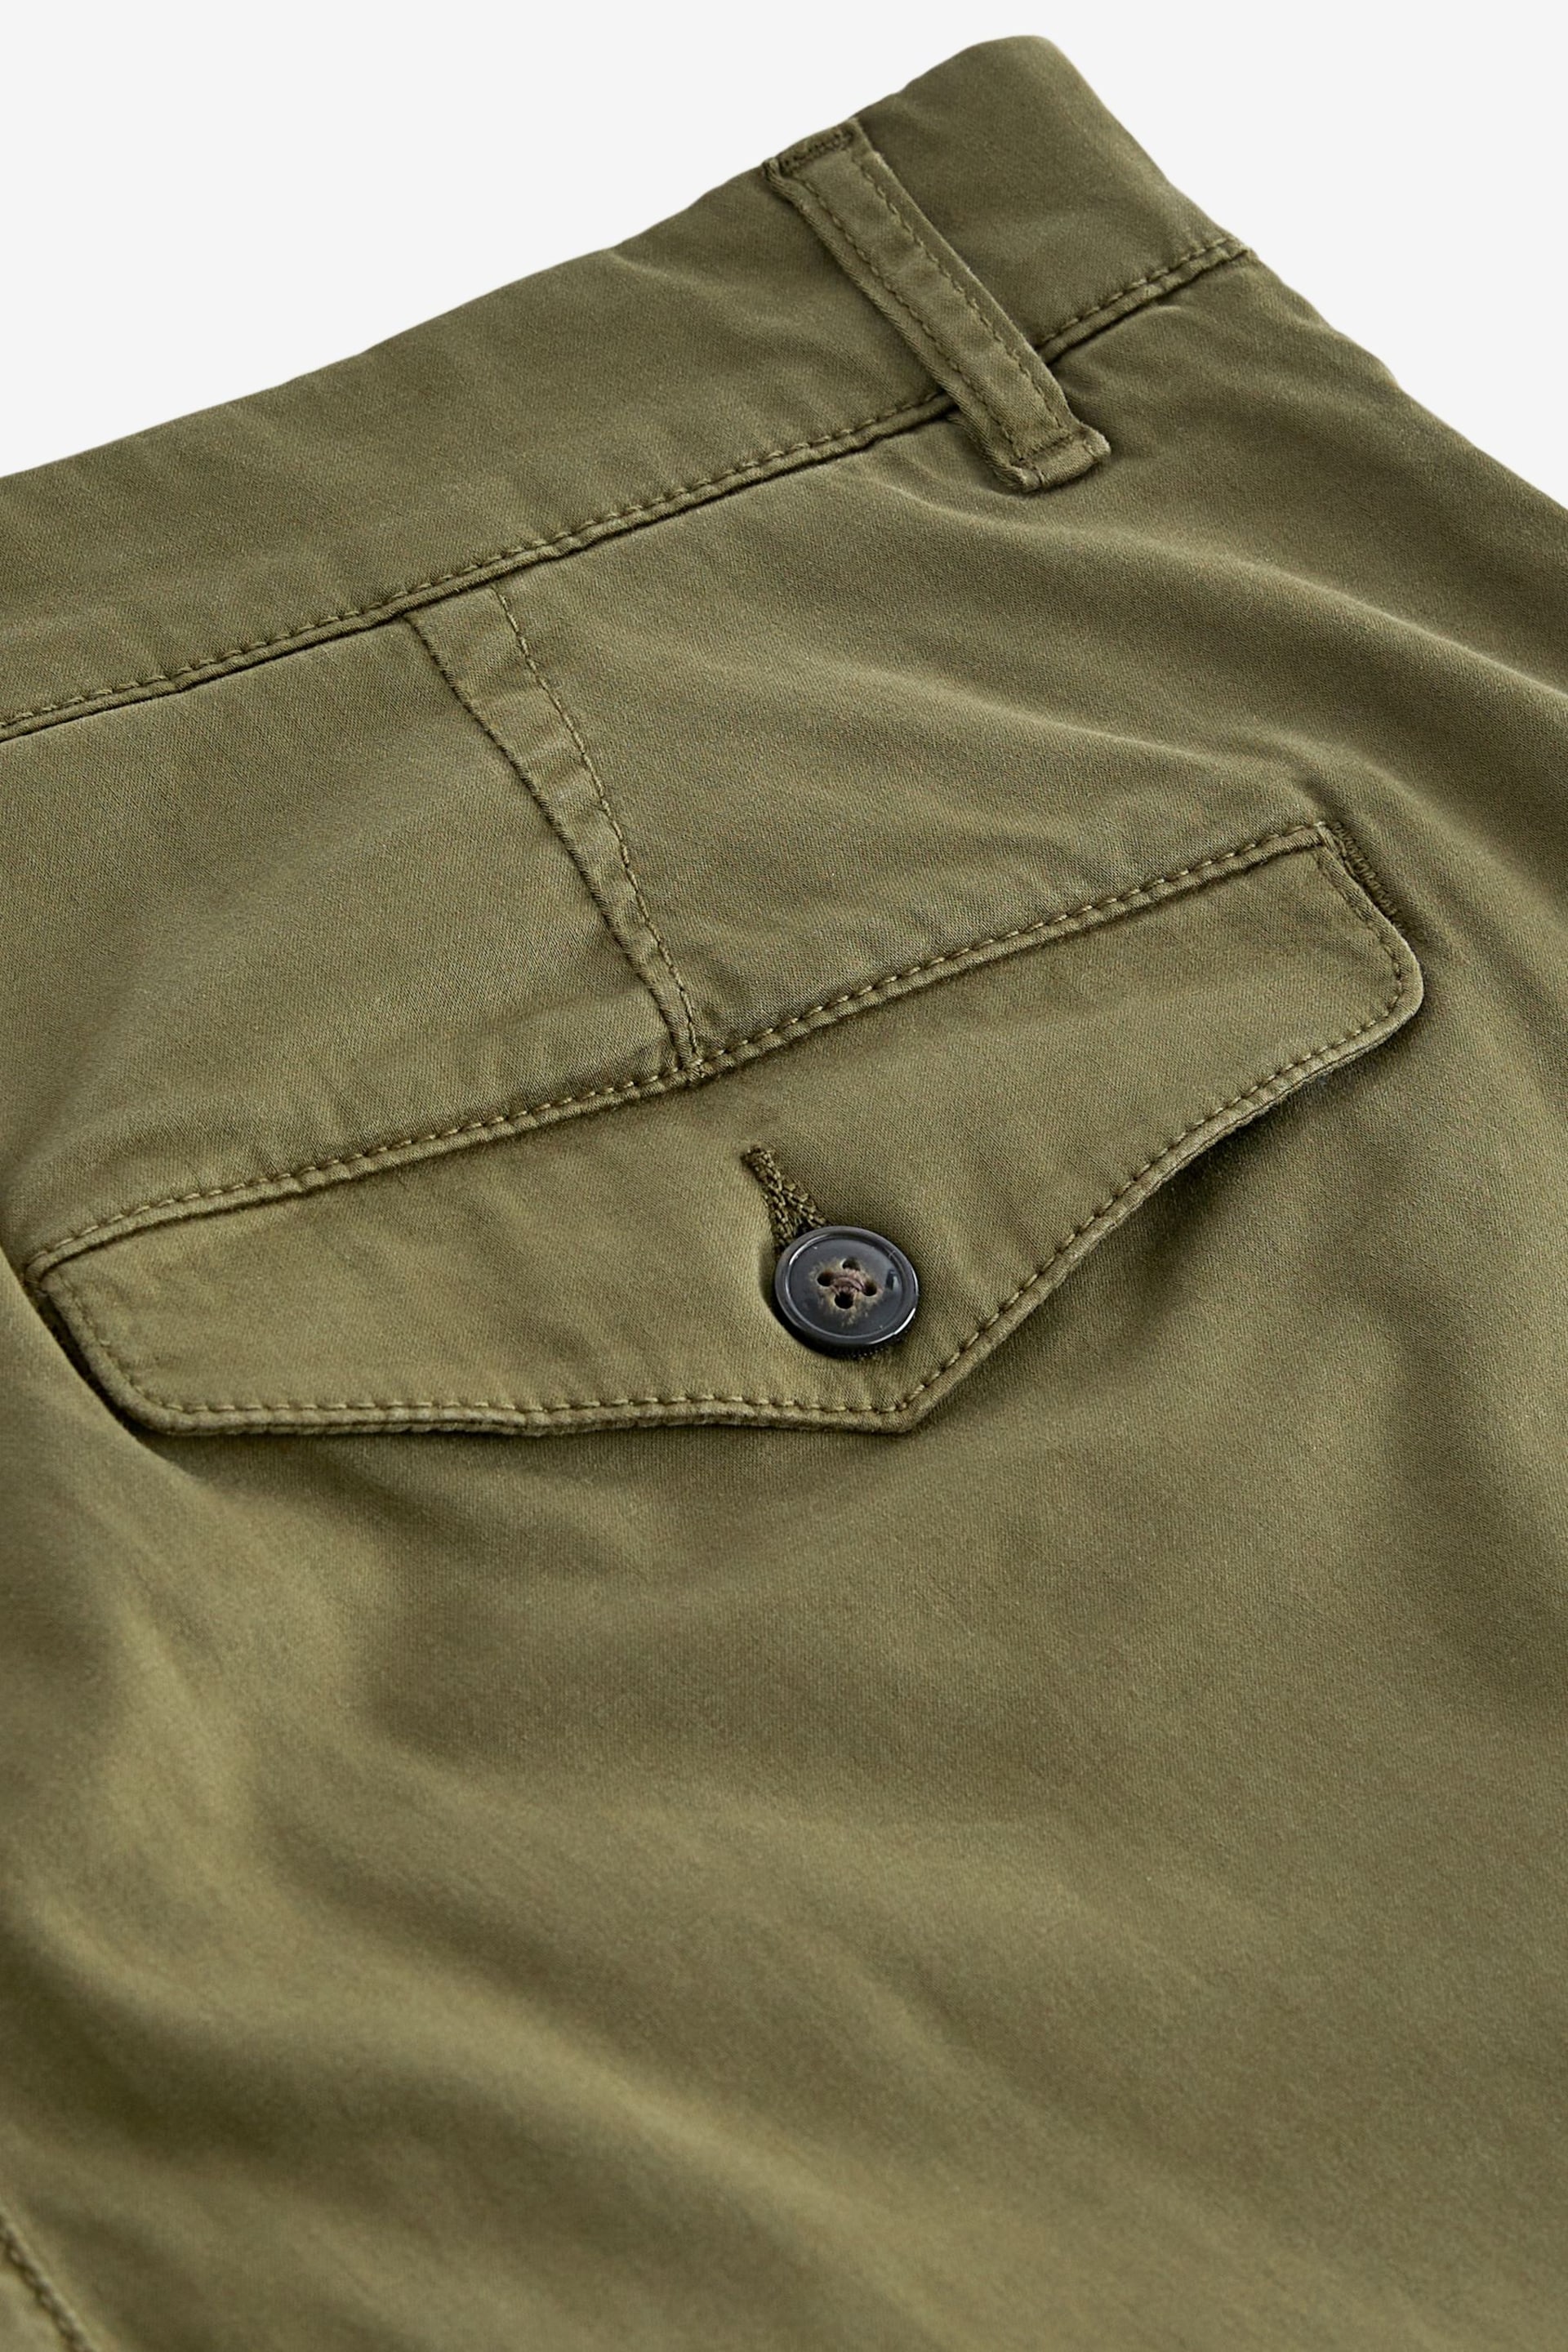 Khaki Green Slim Fit Premium Laundered Stretch Chinos Trousers - Image 11 of 12